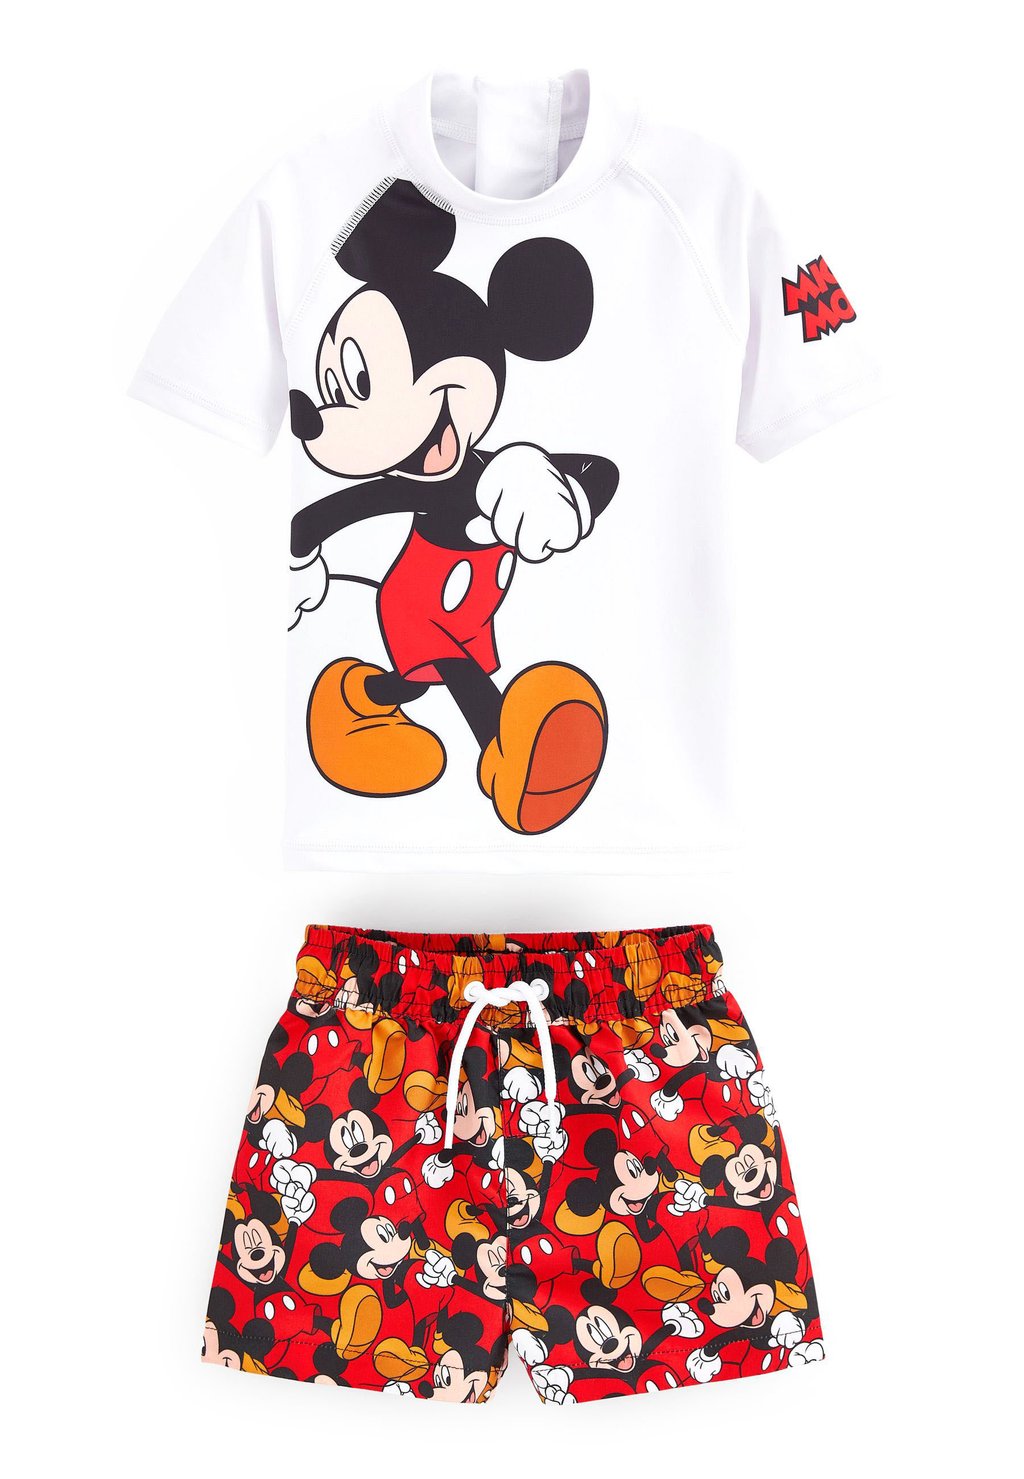 Шорты SET STANDARD Next, цвет red mickey mouse шорты all over printed t shirt and shorts license set next цвет neutral tan mickey mouse